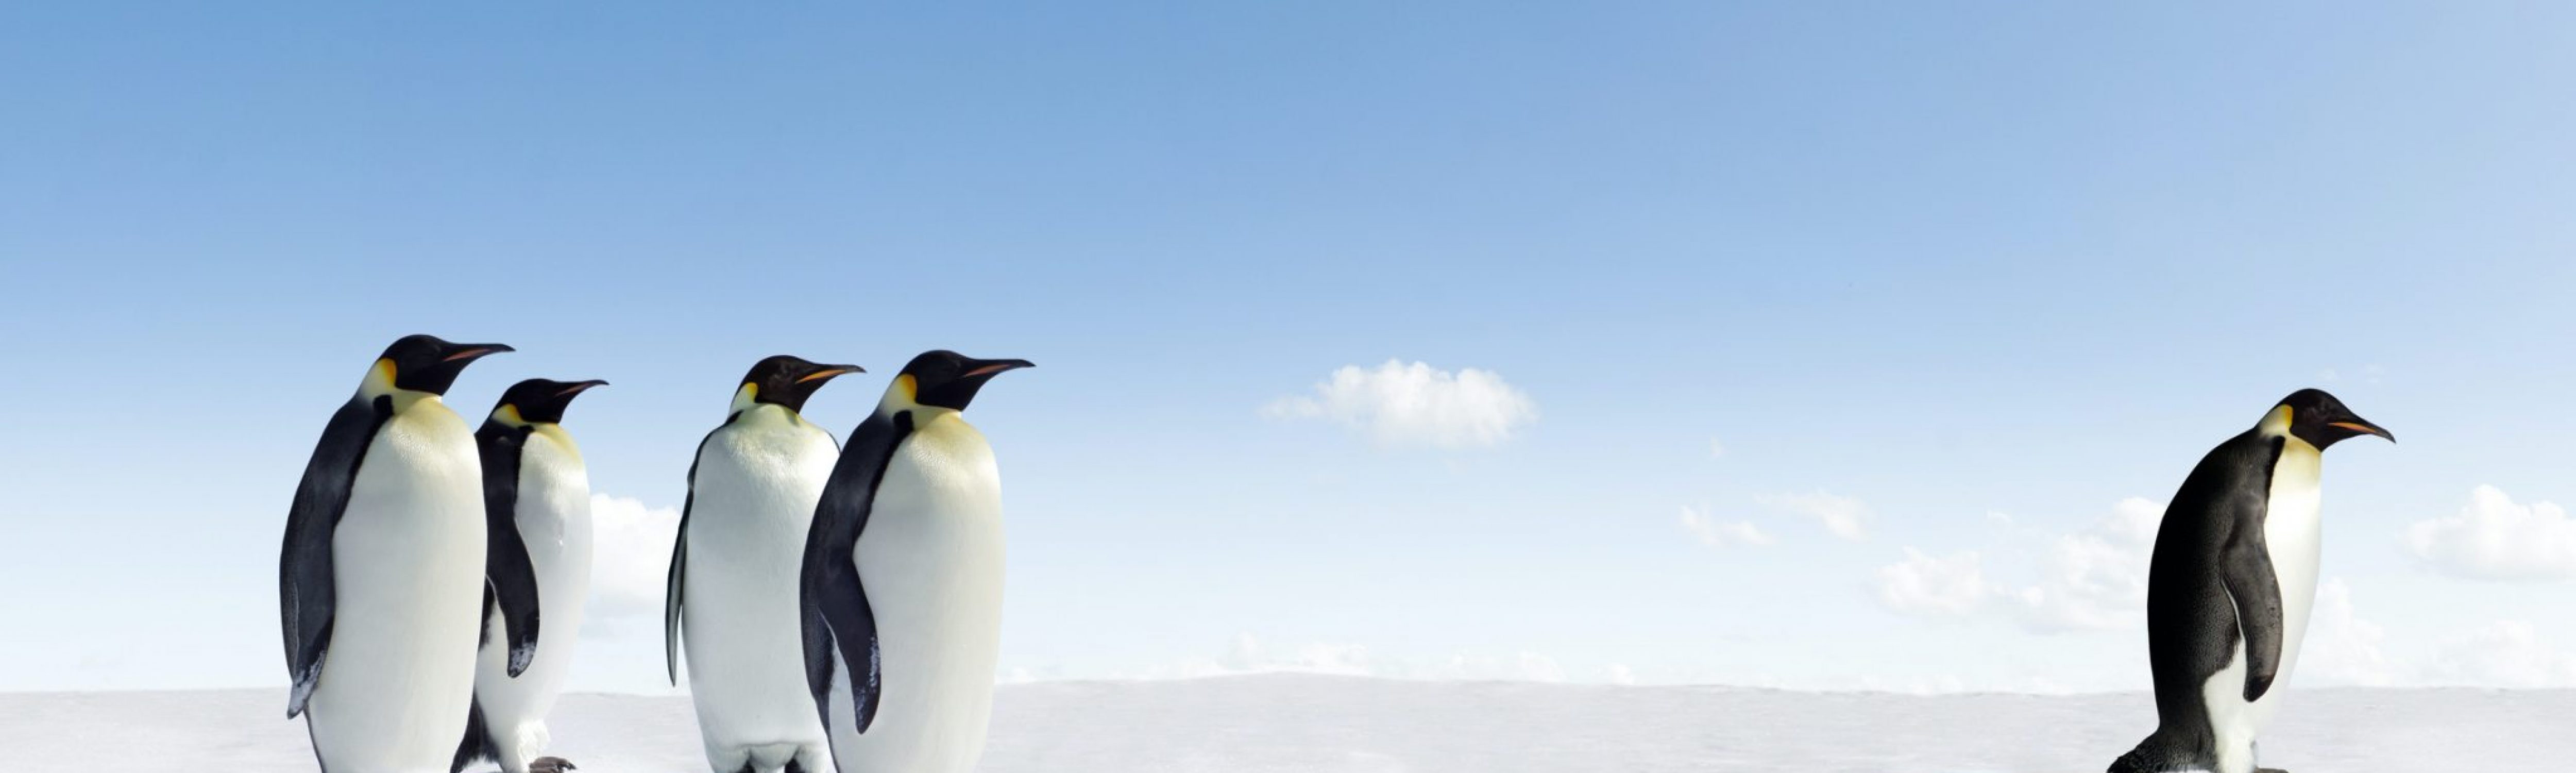 A single penguin standing away from a group of penguins. Business Impact article on Addressing hidden identity threats in the diverse workplace.